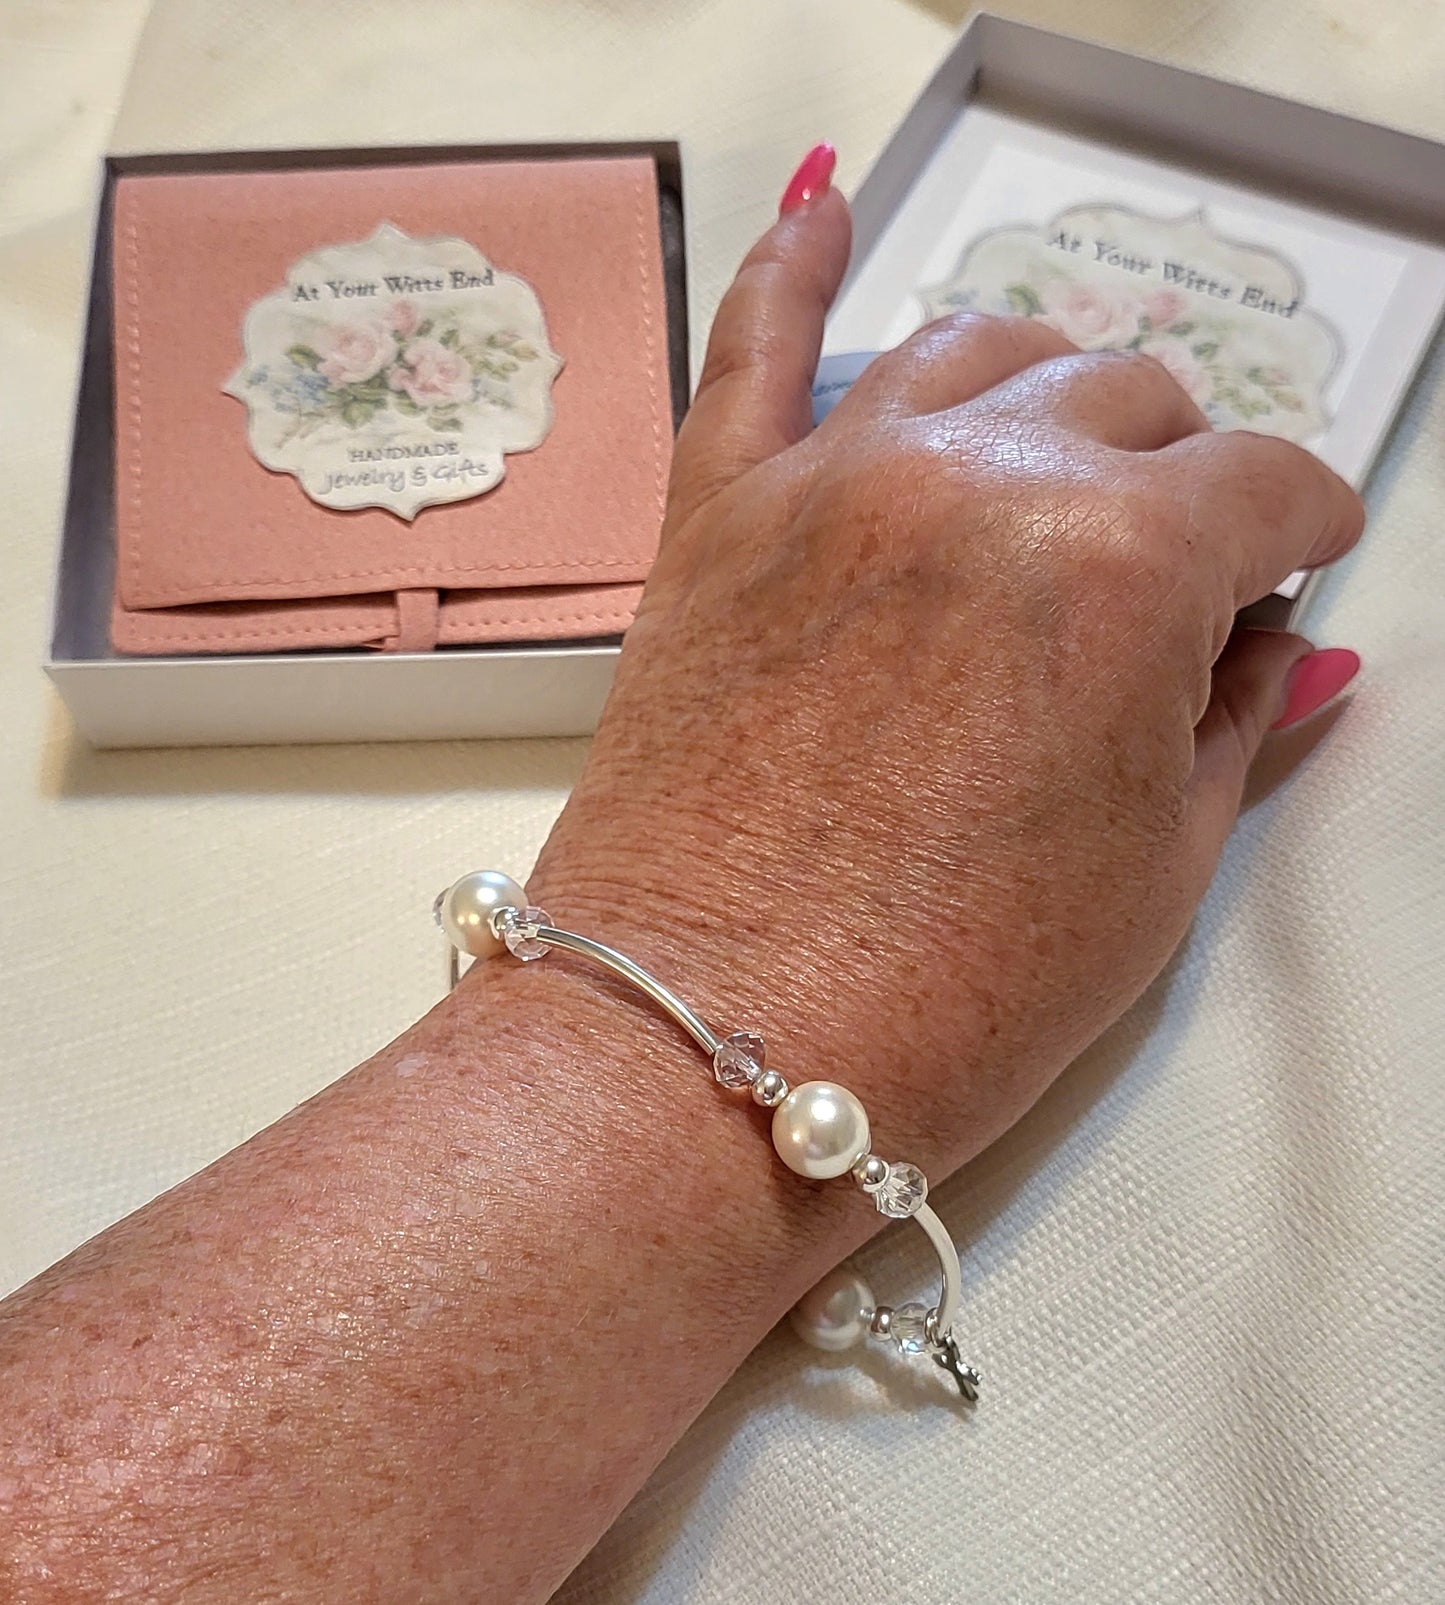 Joyful Blessings, Bracelet, Mother's Day gifts, supportive gifts, gifts for her